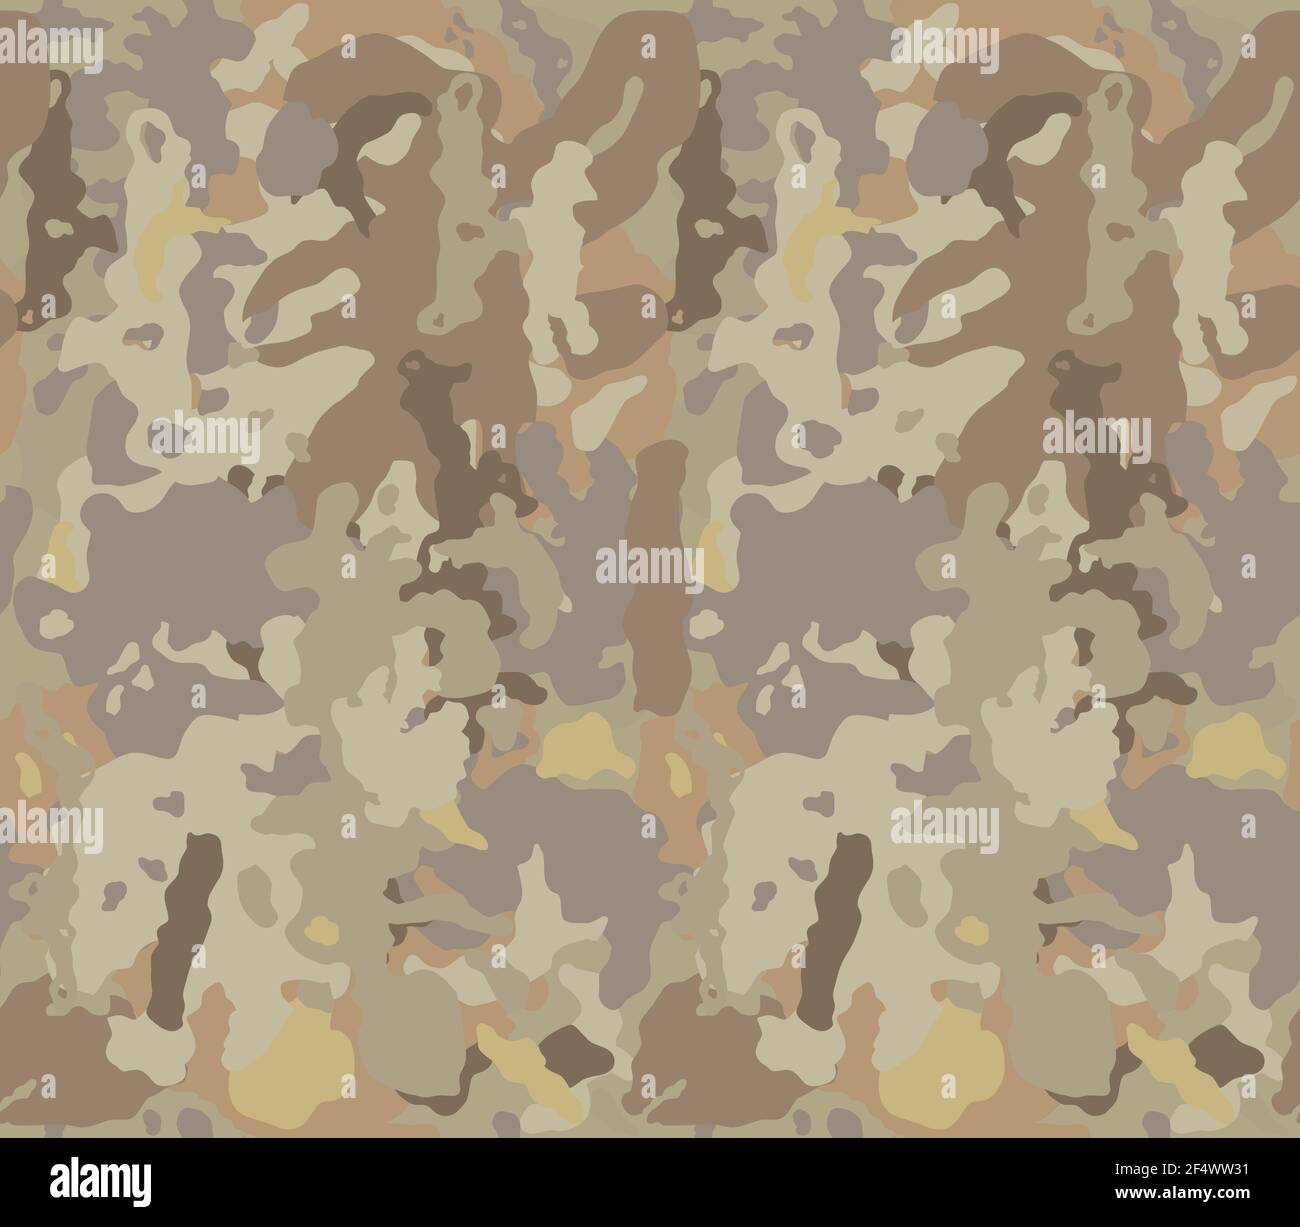 Military Camouflage Pattern 